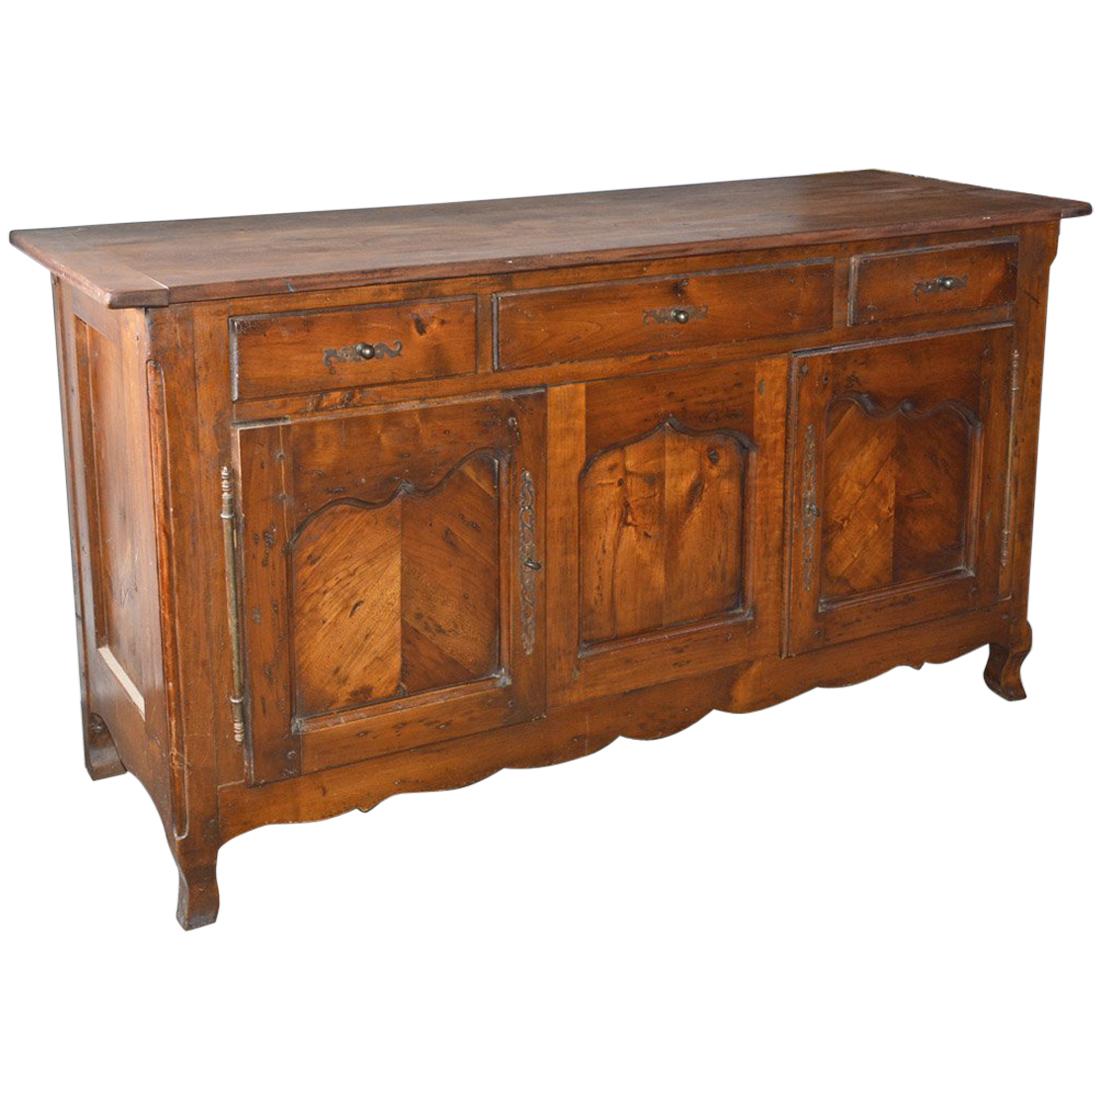 Antique Rustic Louis XV Style French Provincial Sideboard